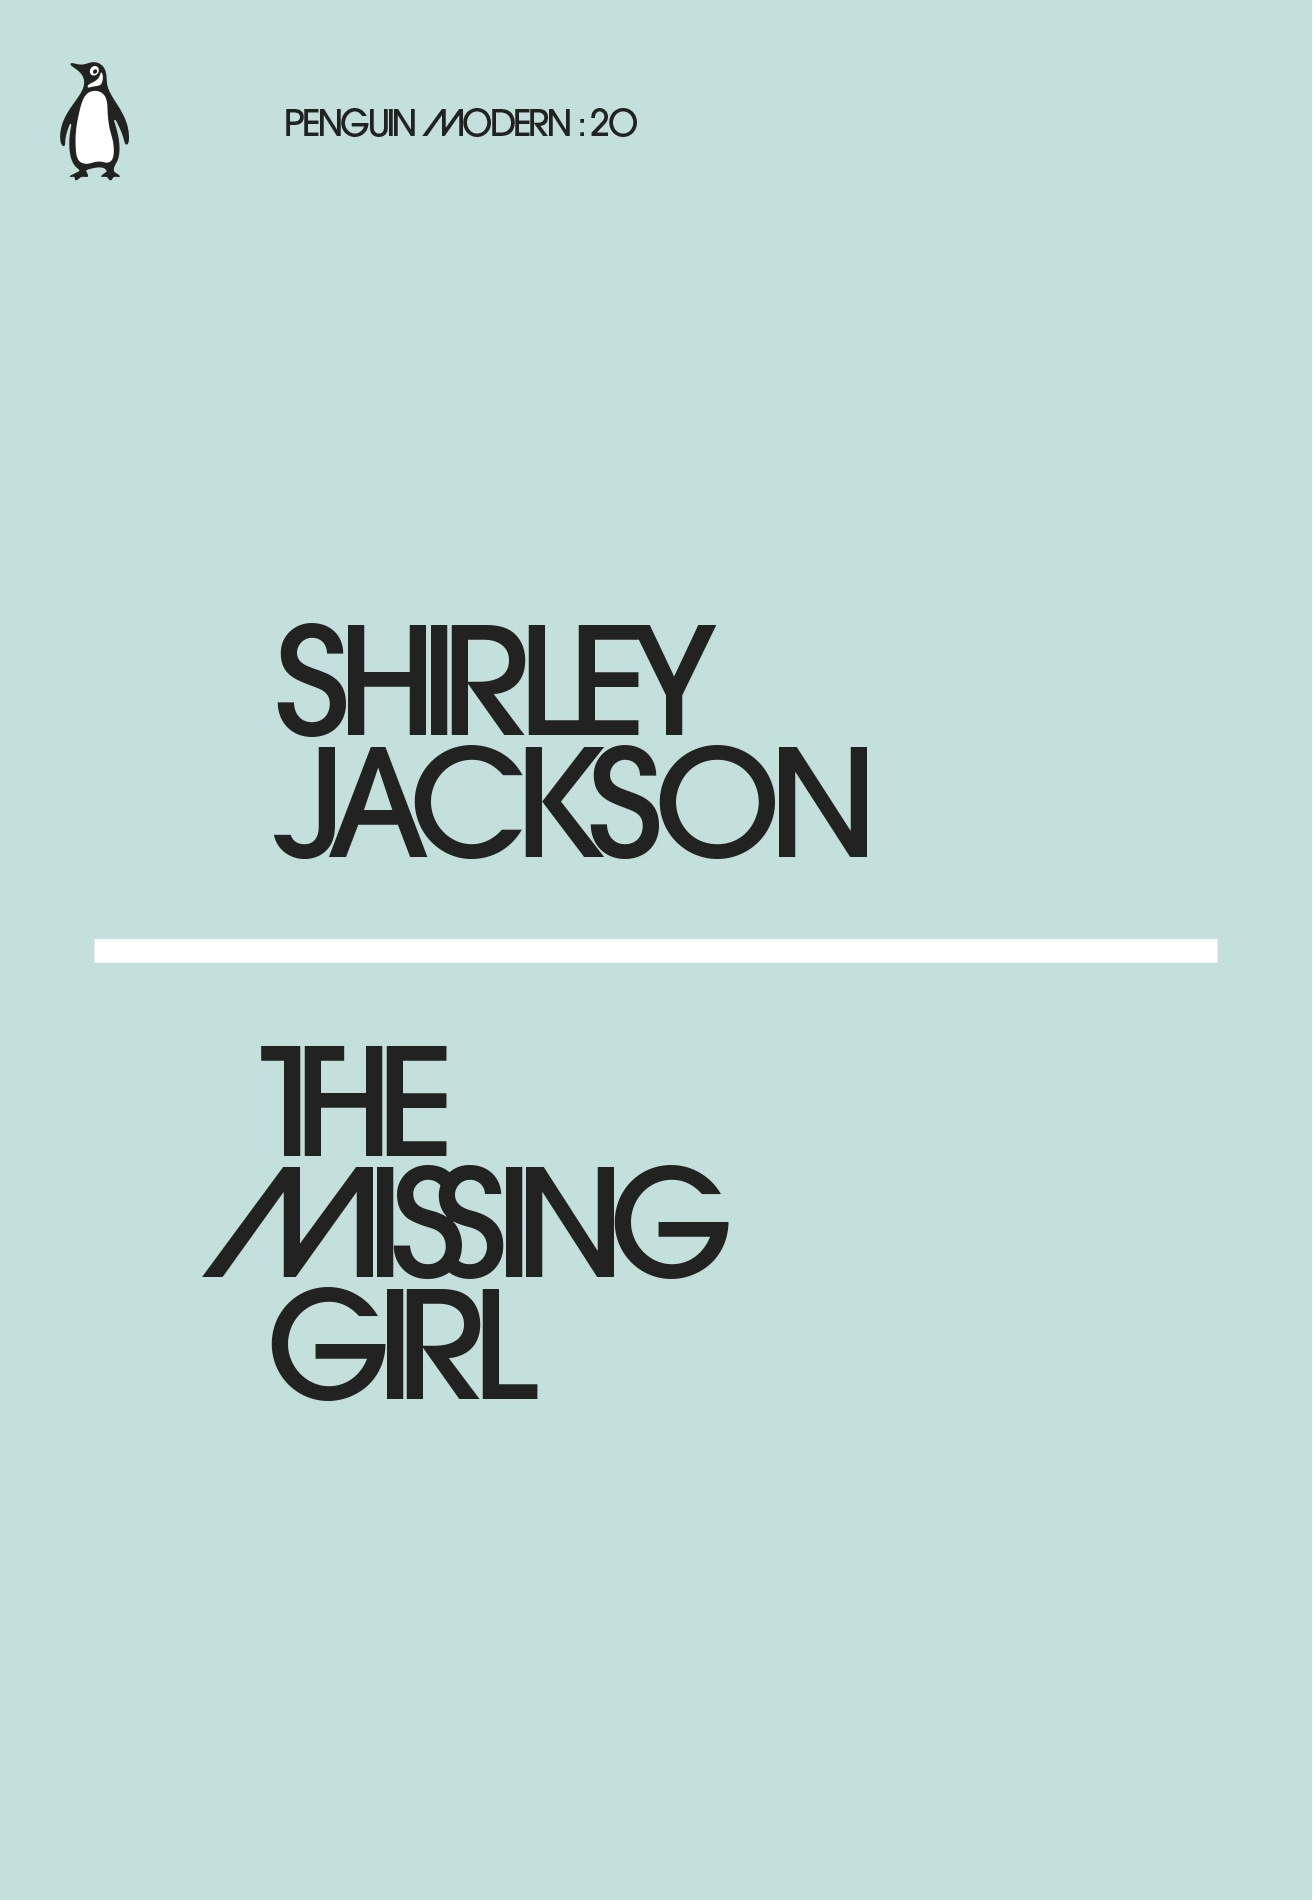 Book “The Missing Girl” by Shirley Jackson — February 22, 2018